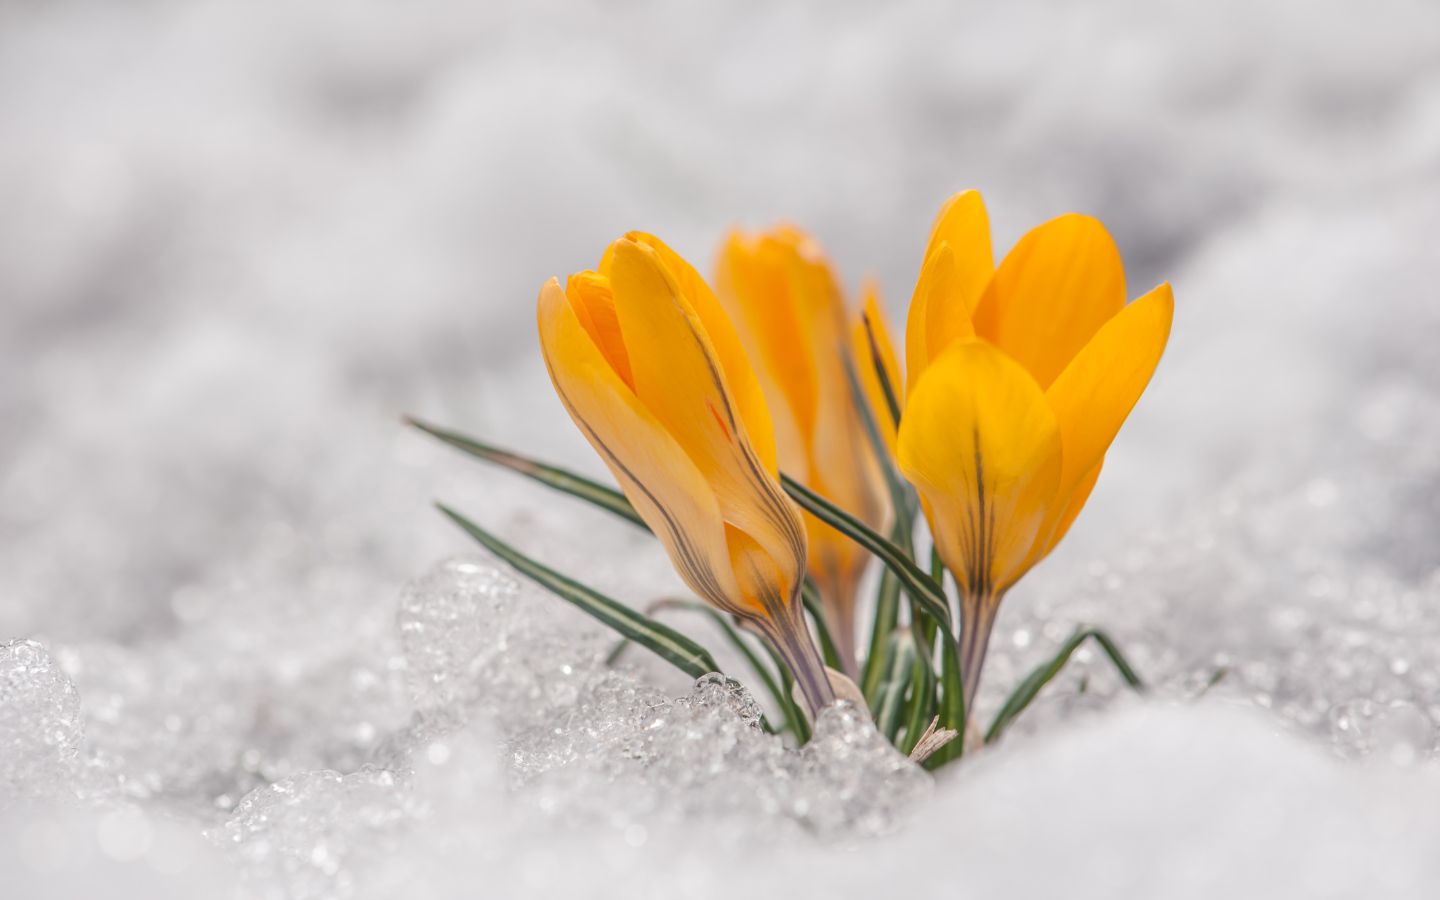 yellow crocus blossoms growing out of melting white snow